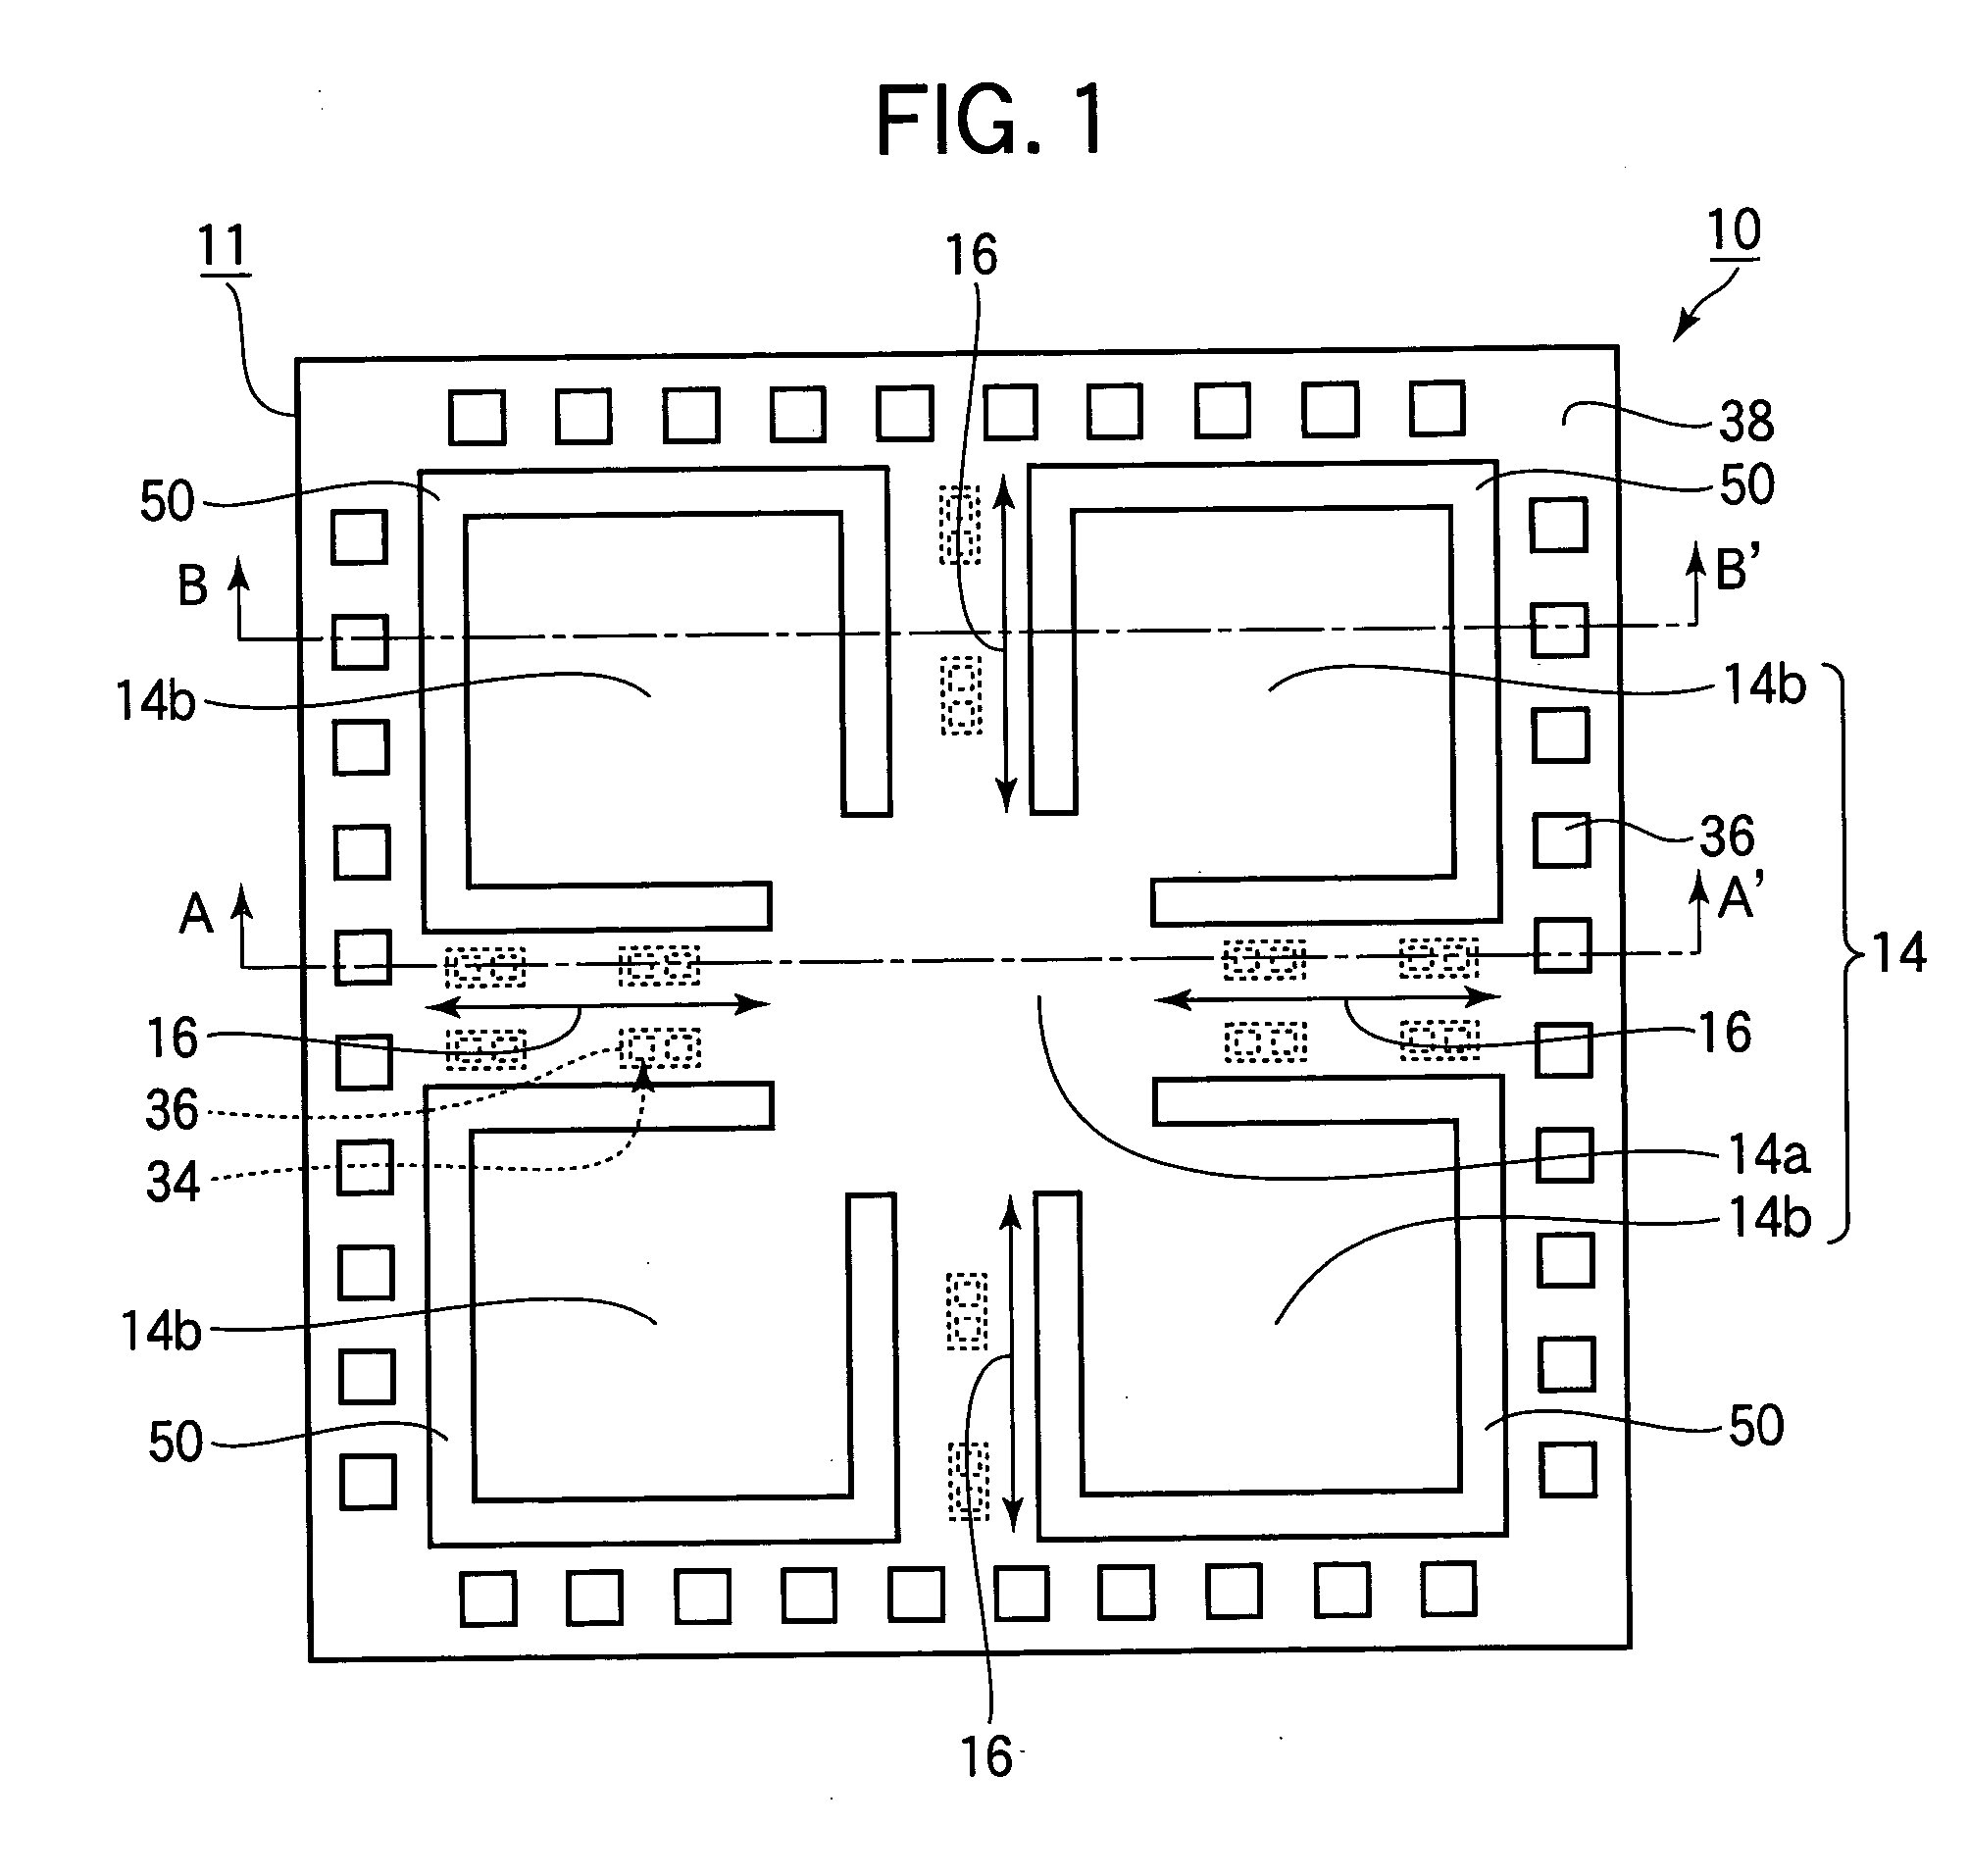 Method of manufacturing a micro-electrical-mechanical system